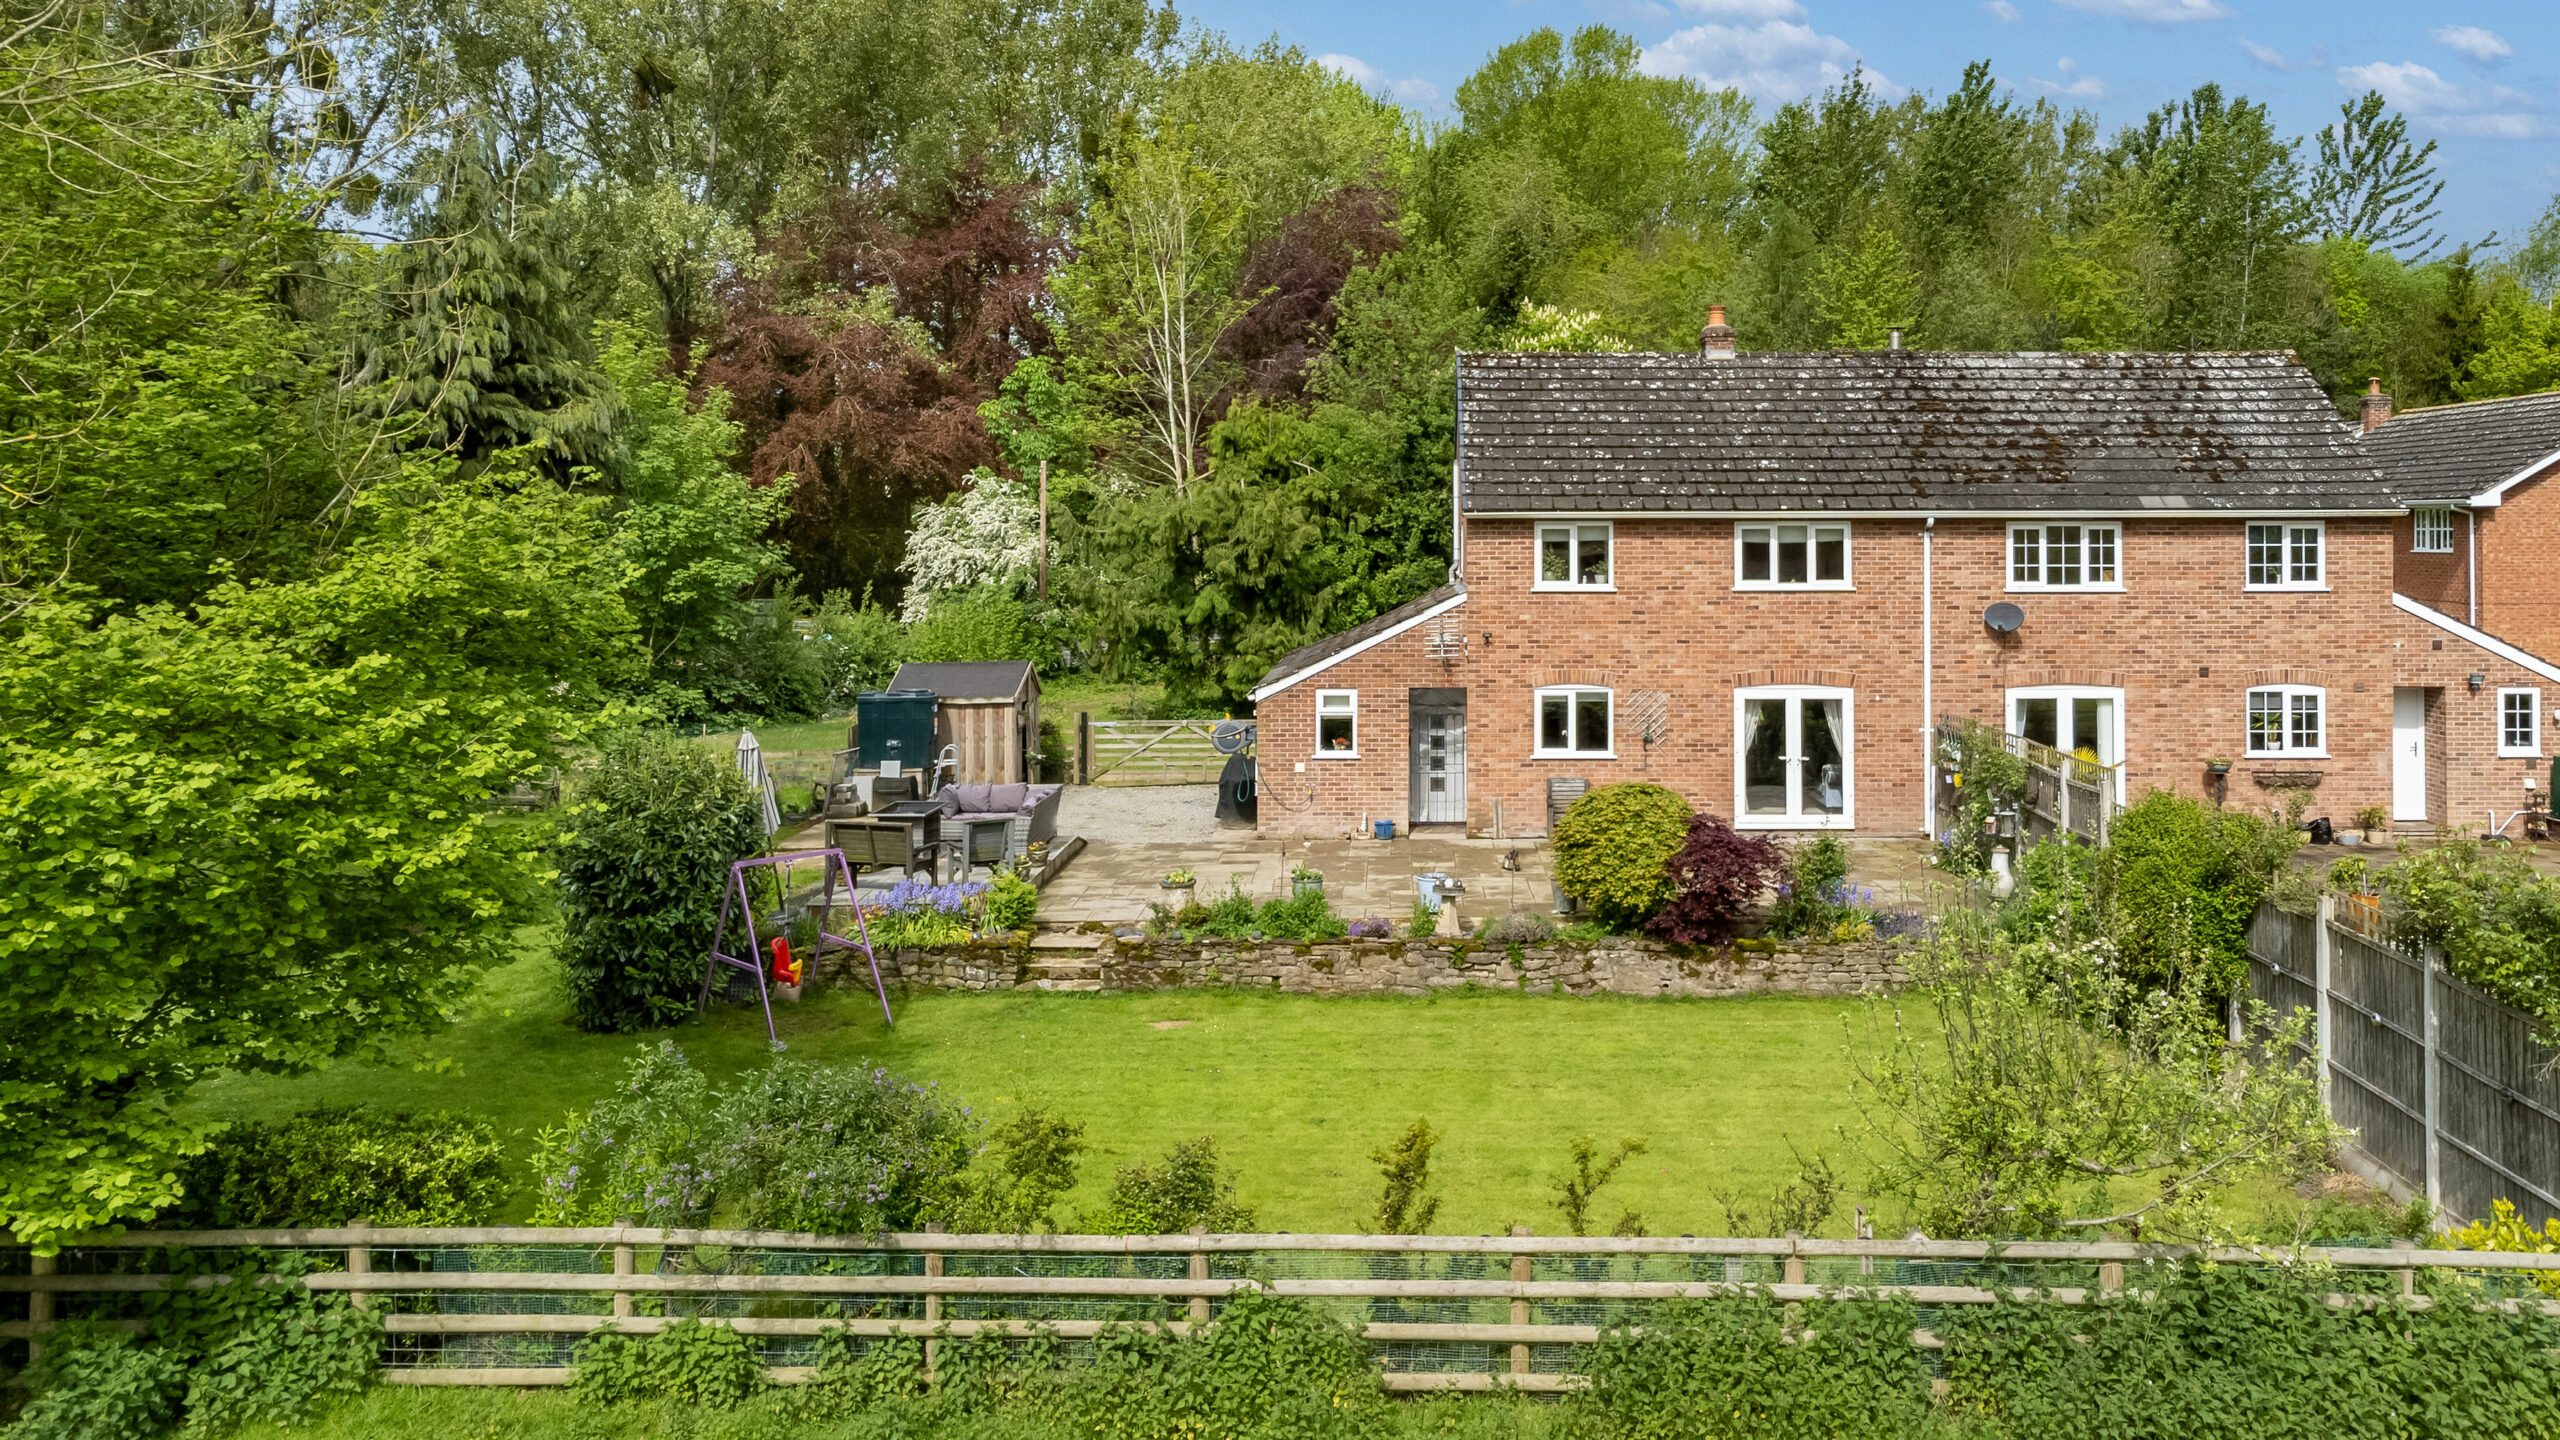 3 Bull Farm Cottages – Rural three bed, contemporary gem